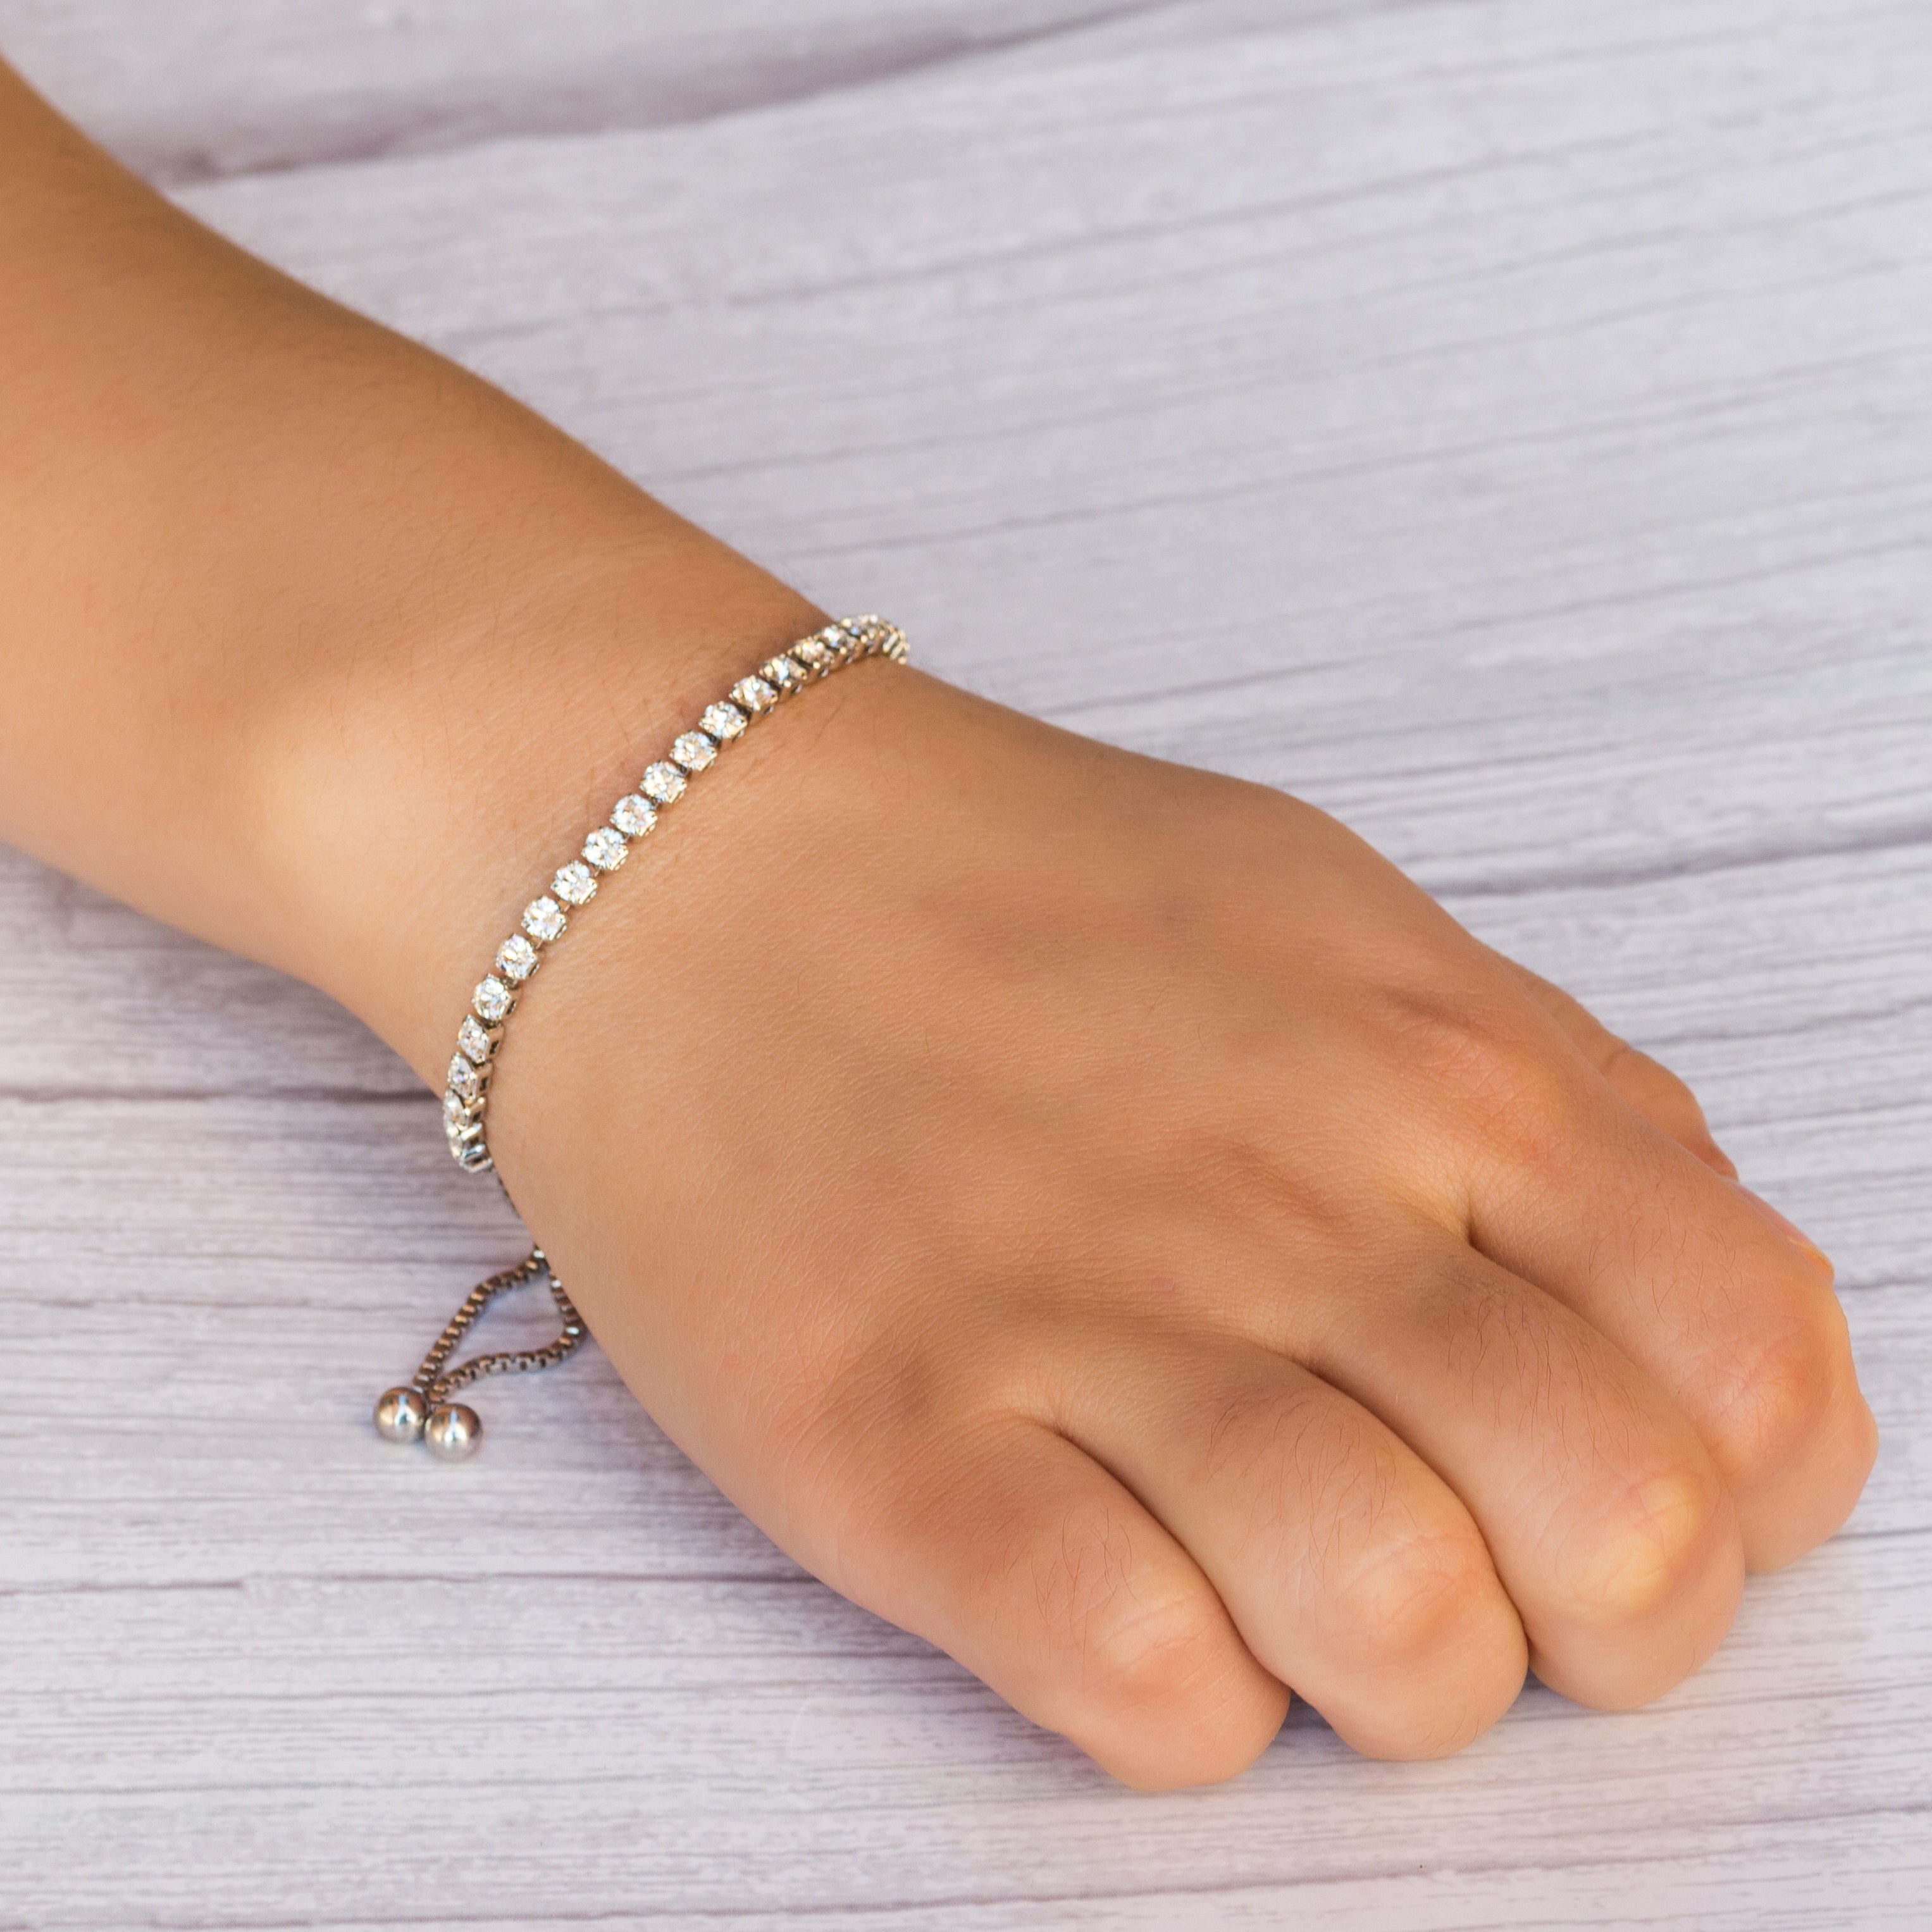 Solitaire Friendship Bracelet Created with Zircondia® Crystals